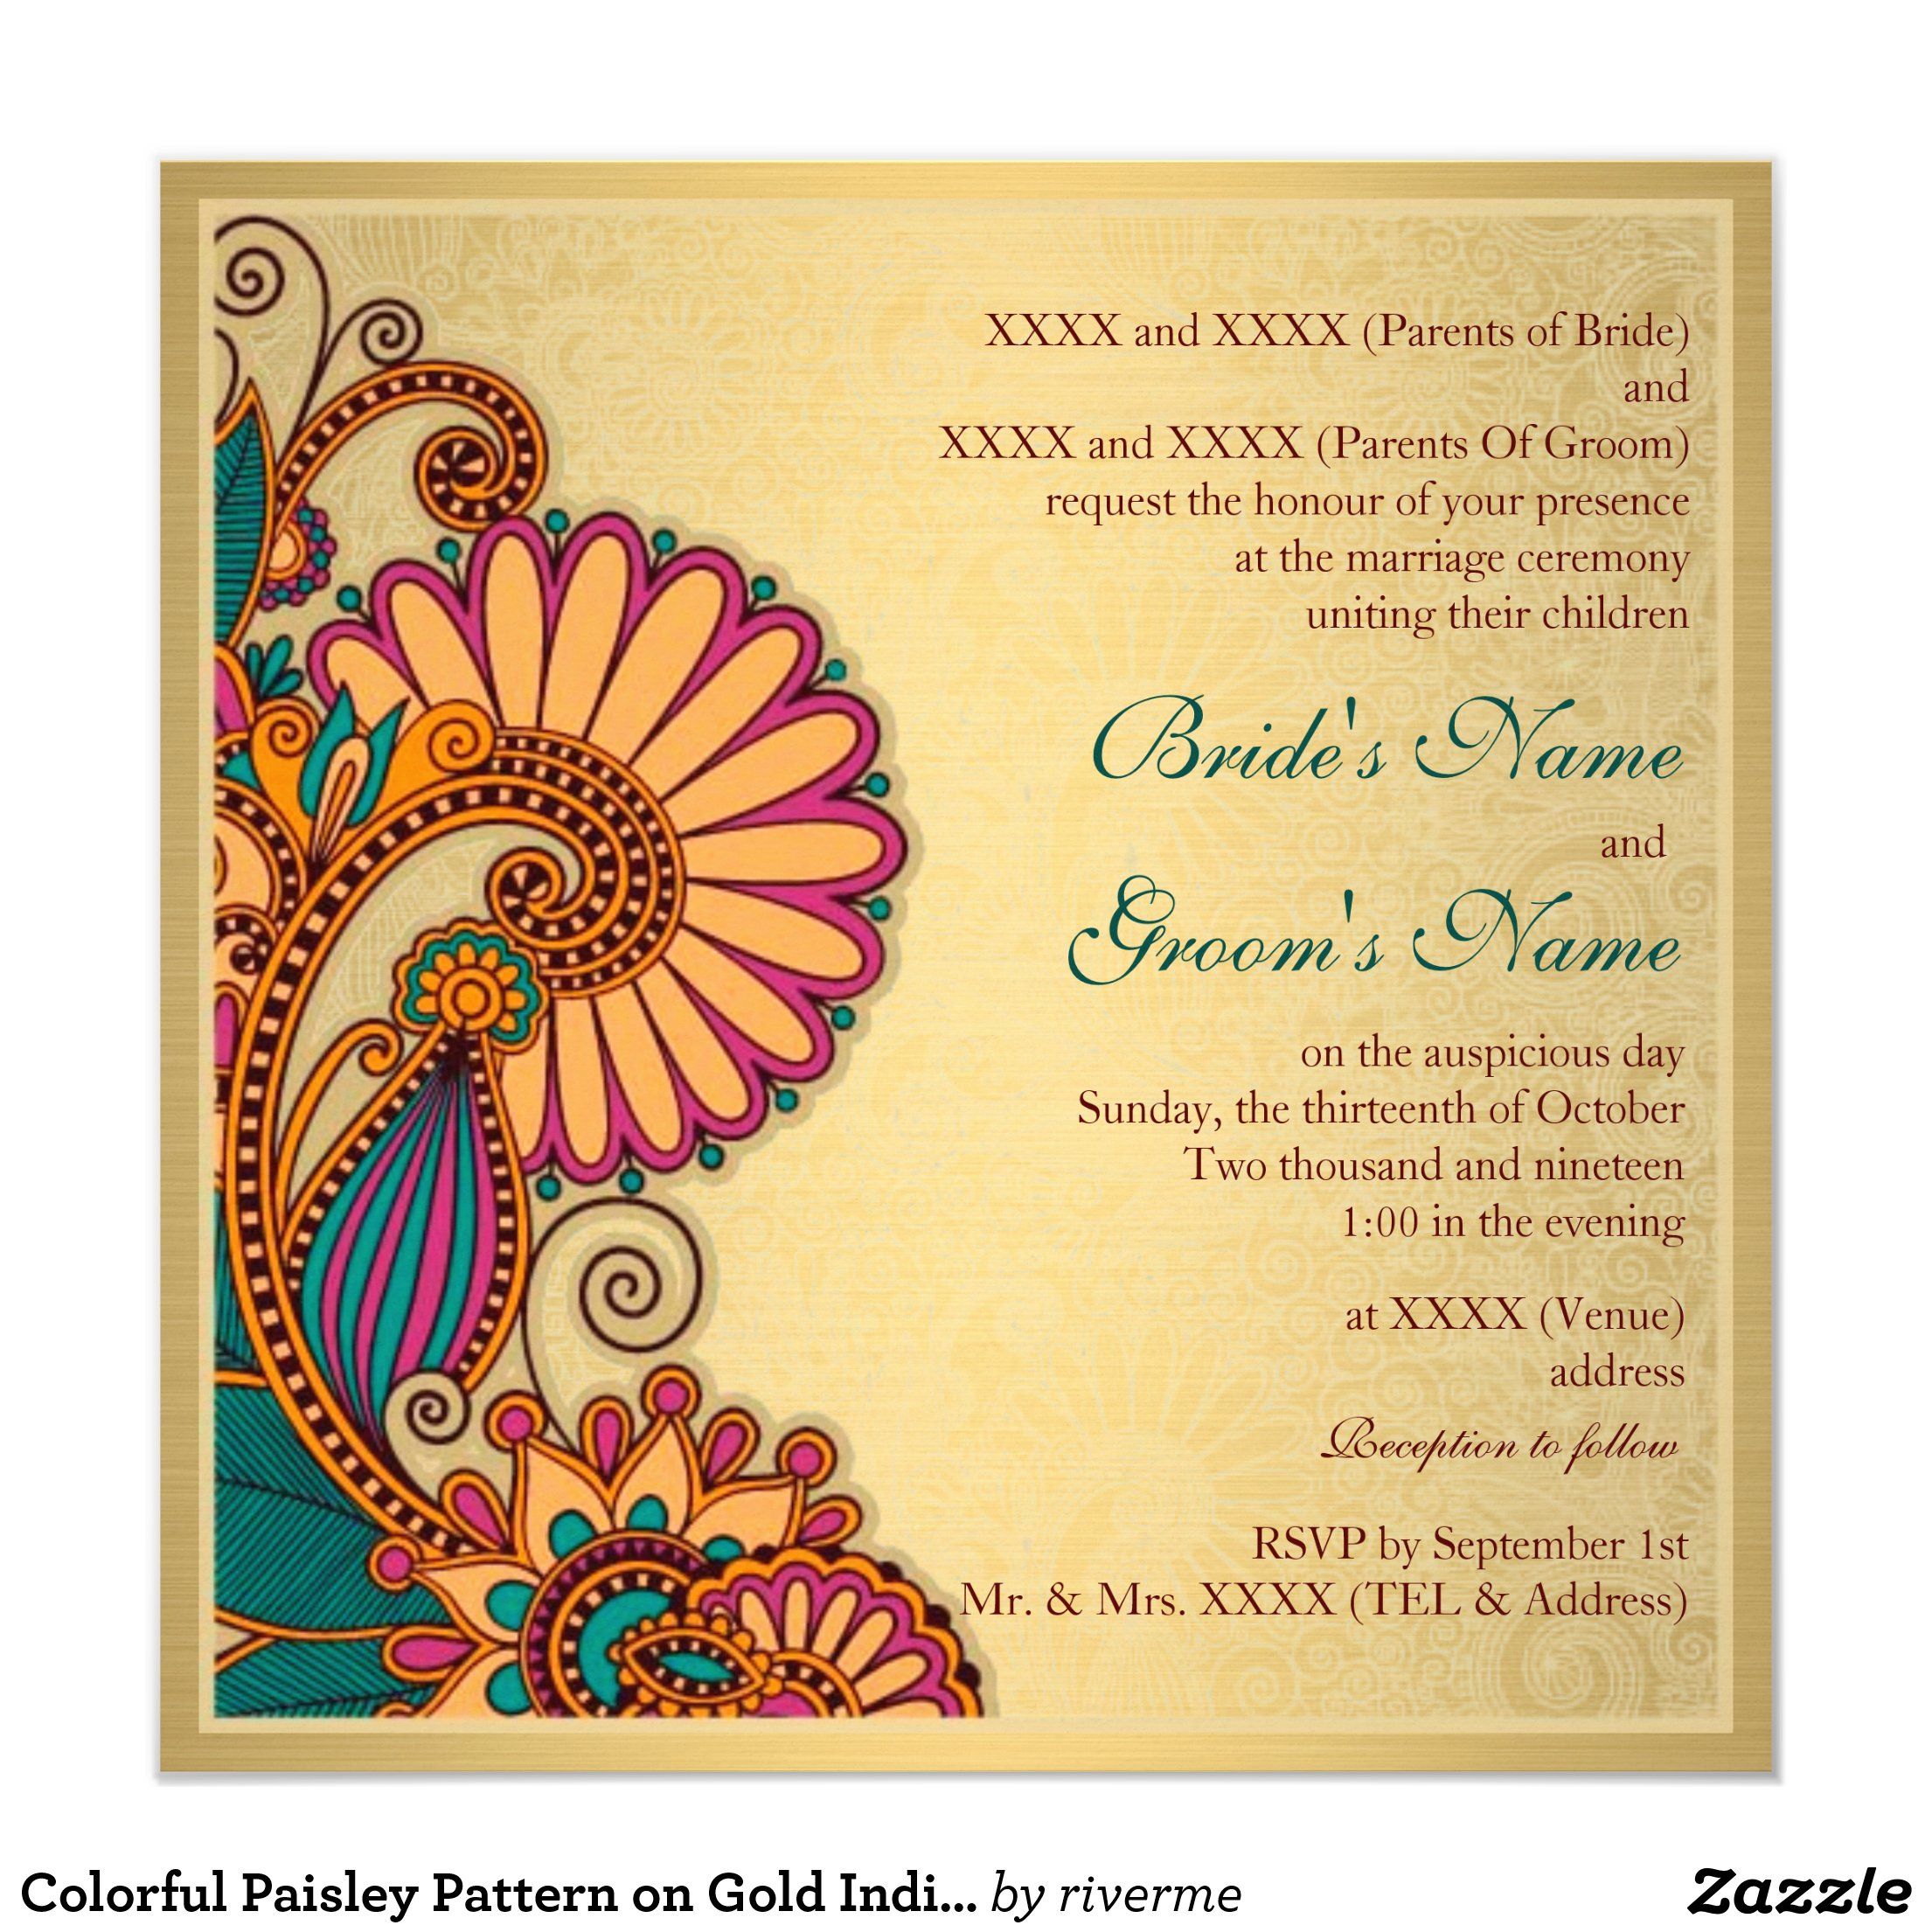 Colorful Paisley Pattern on Gold Indian Wedding Invitation